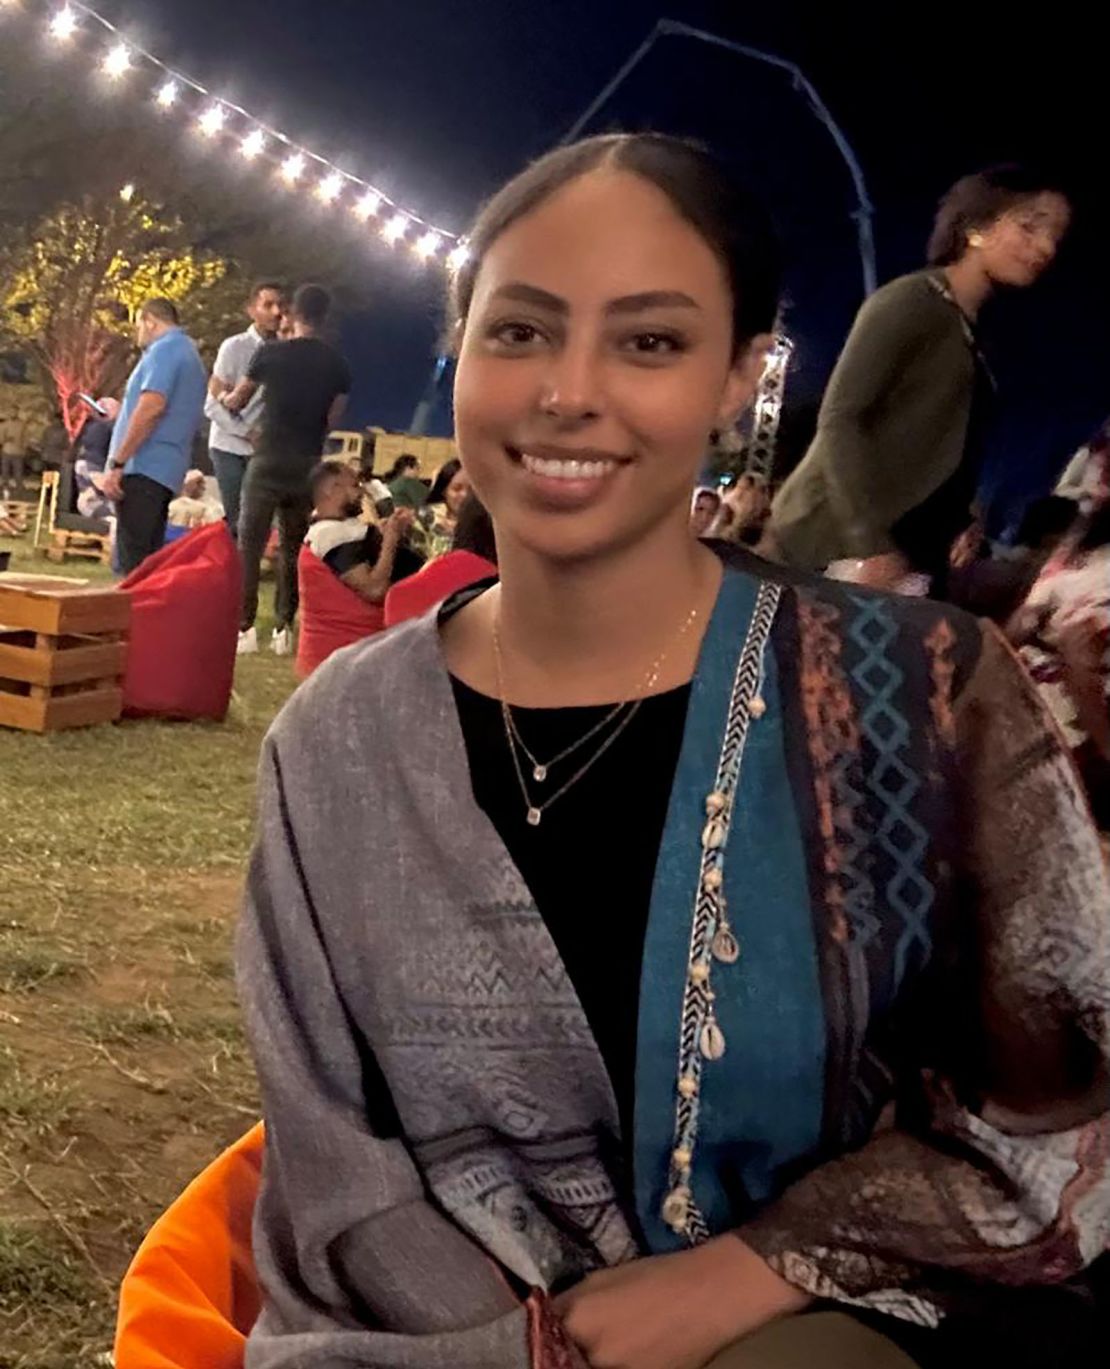 Safa Babikir, pictured at a Ramadan event in Khartoum two weeks before the conflict started on April 15, made the risky journey from the capital to the Egyptian border.